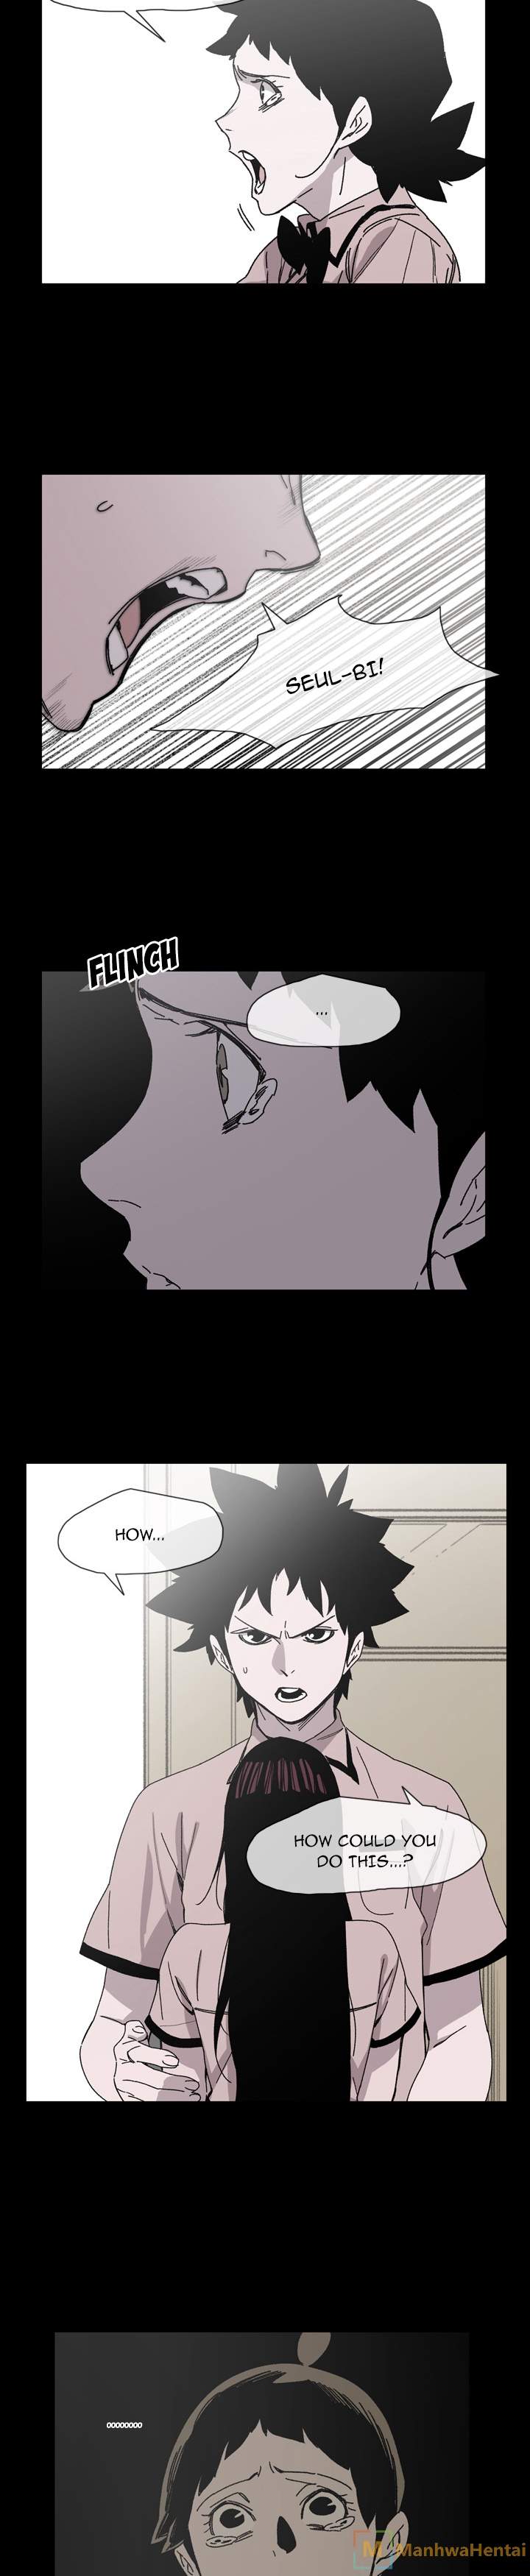 Say You Like It - Chapter 26 Page 7